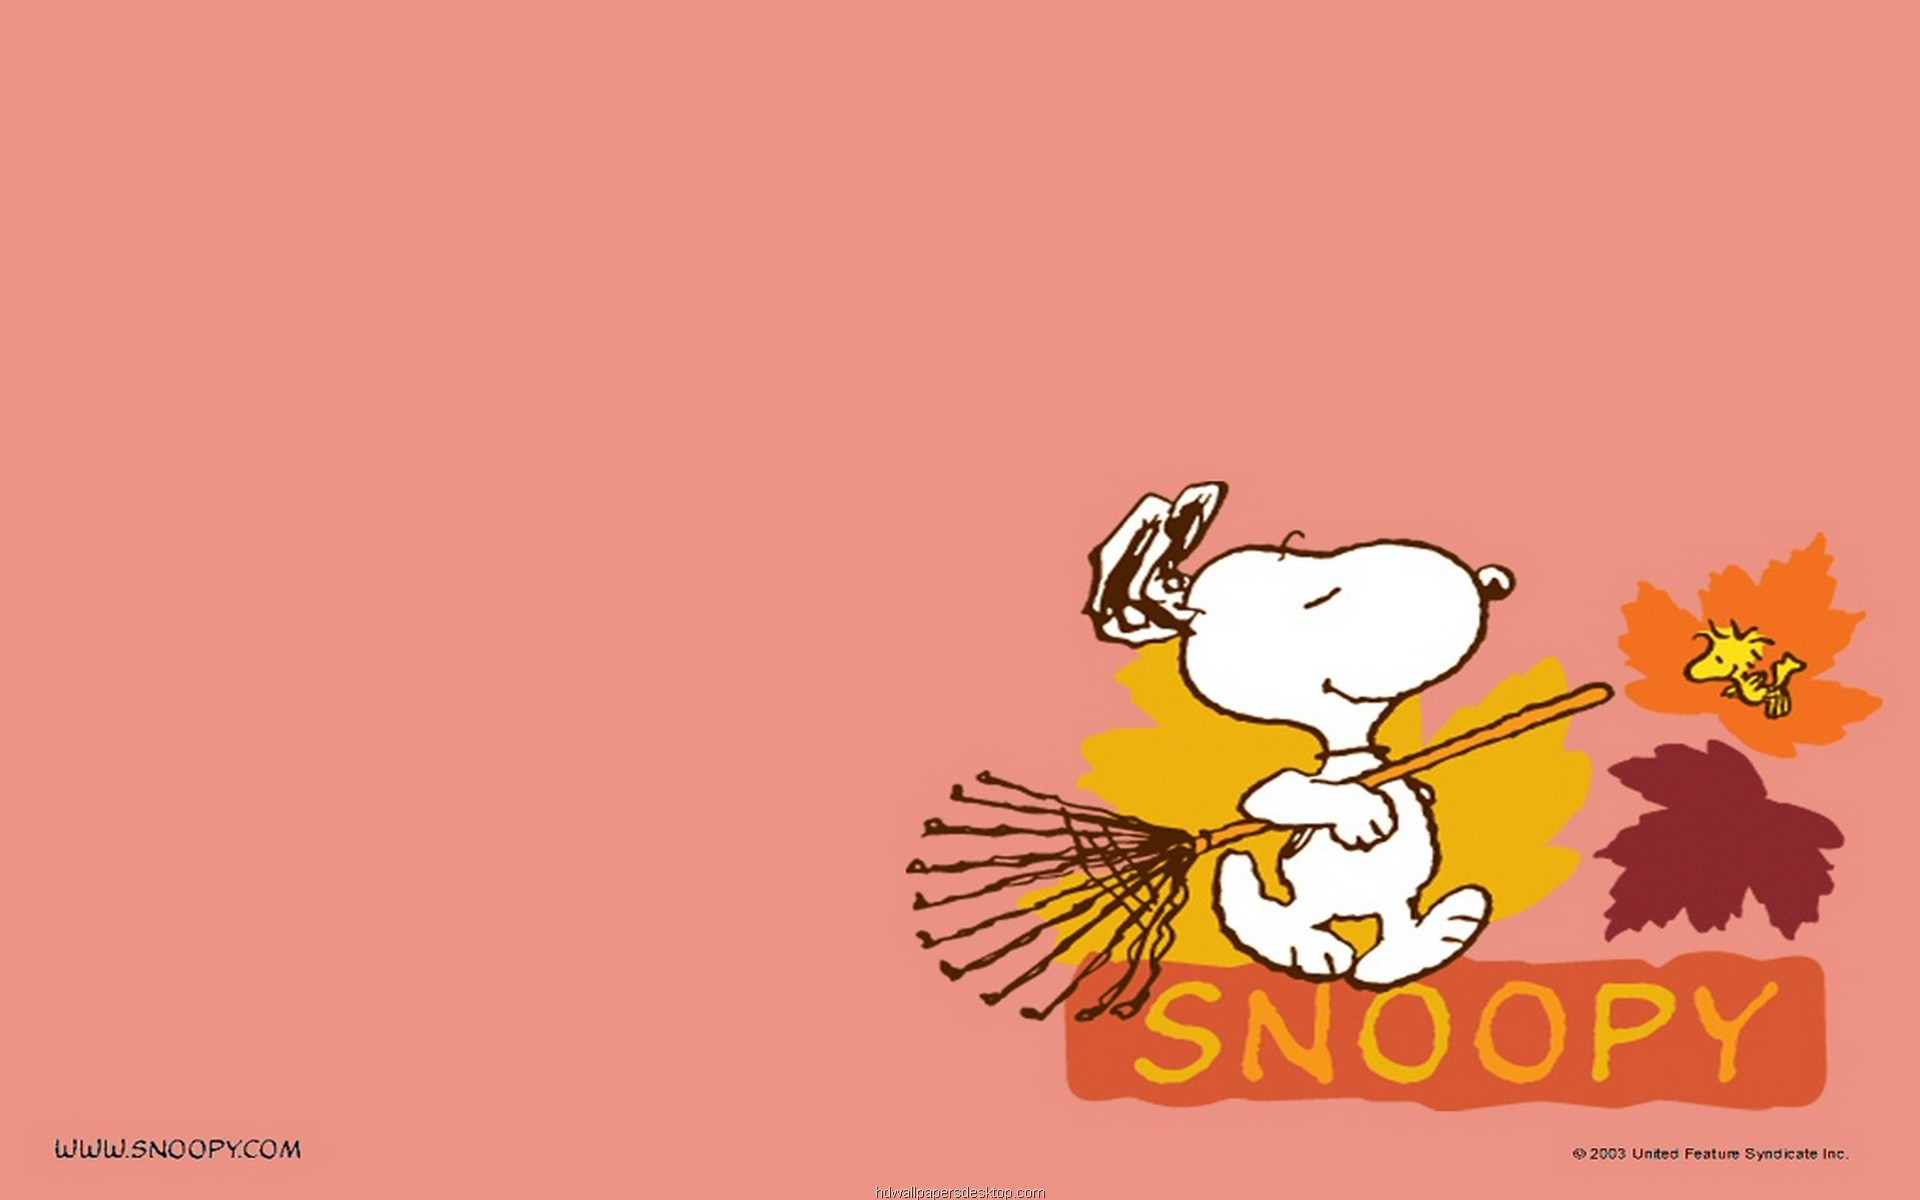 1920x1200 45 Snoopy Wallpaper For Android Snoopy - Cartoons Wallpapers Desktop ...